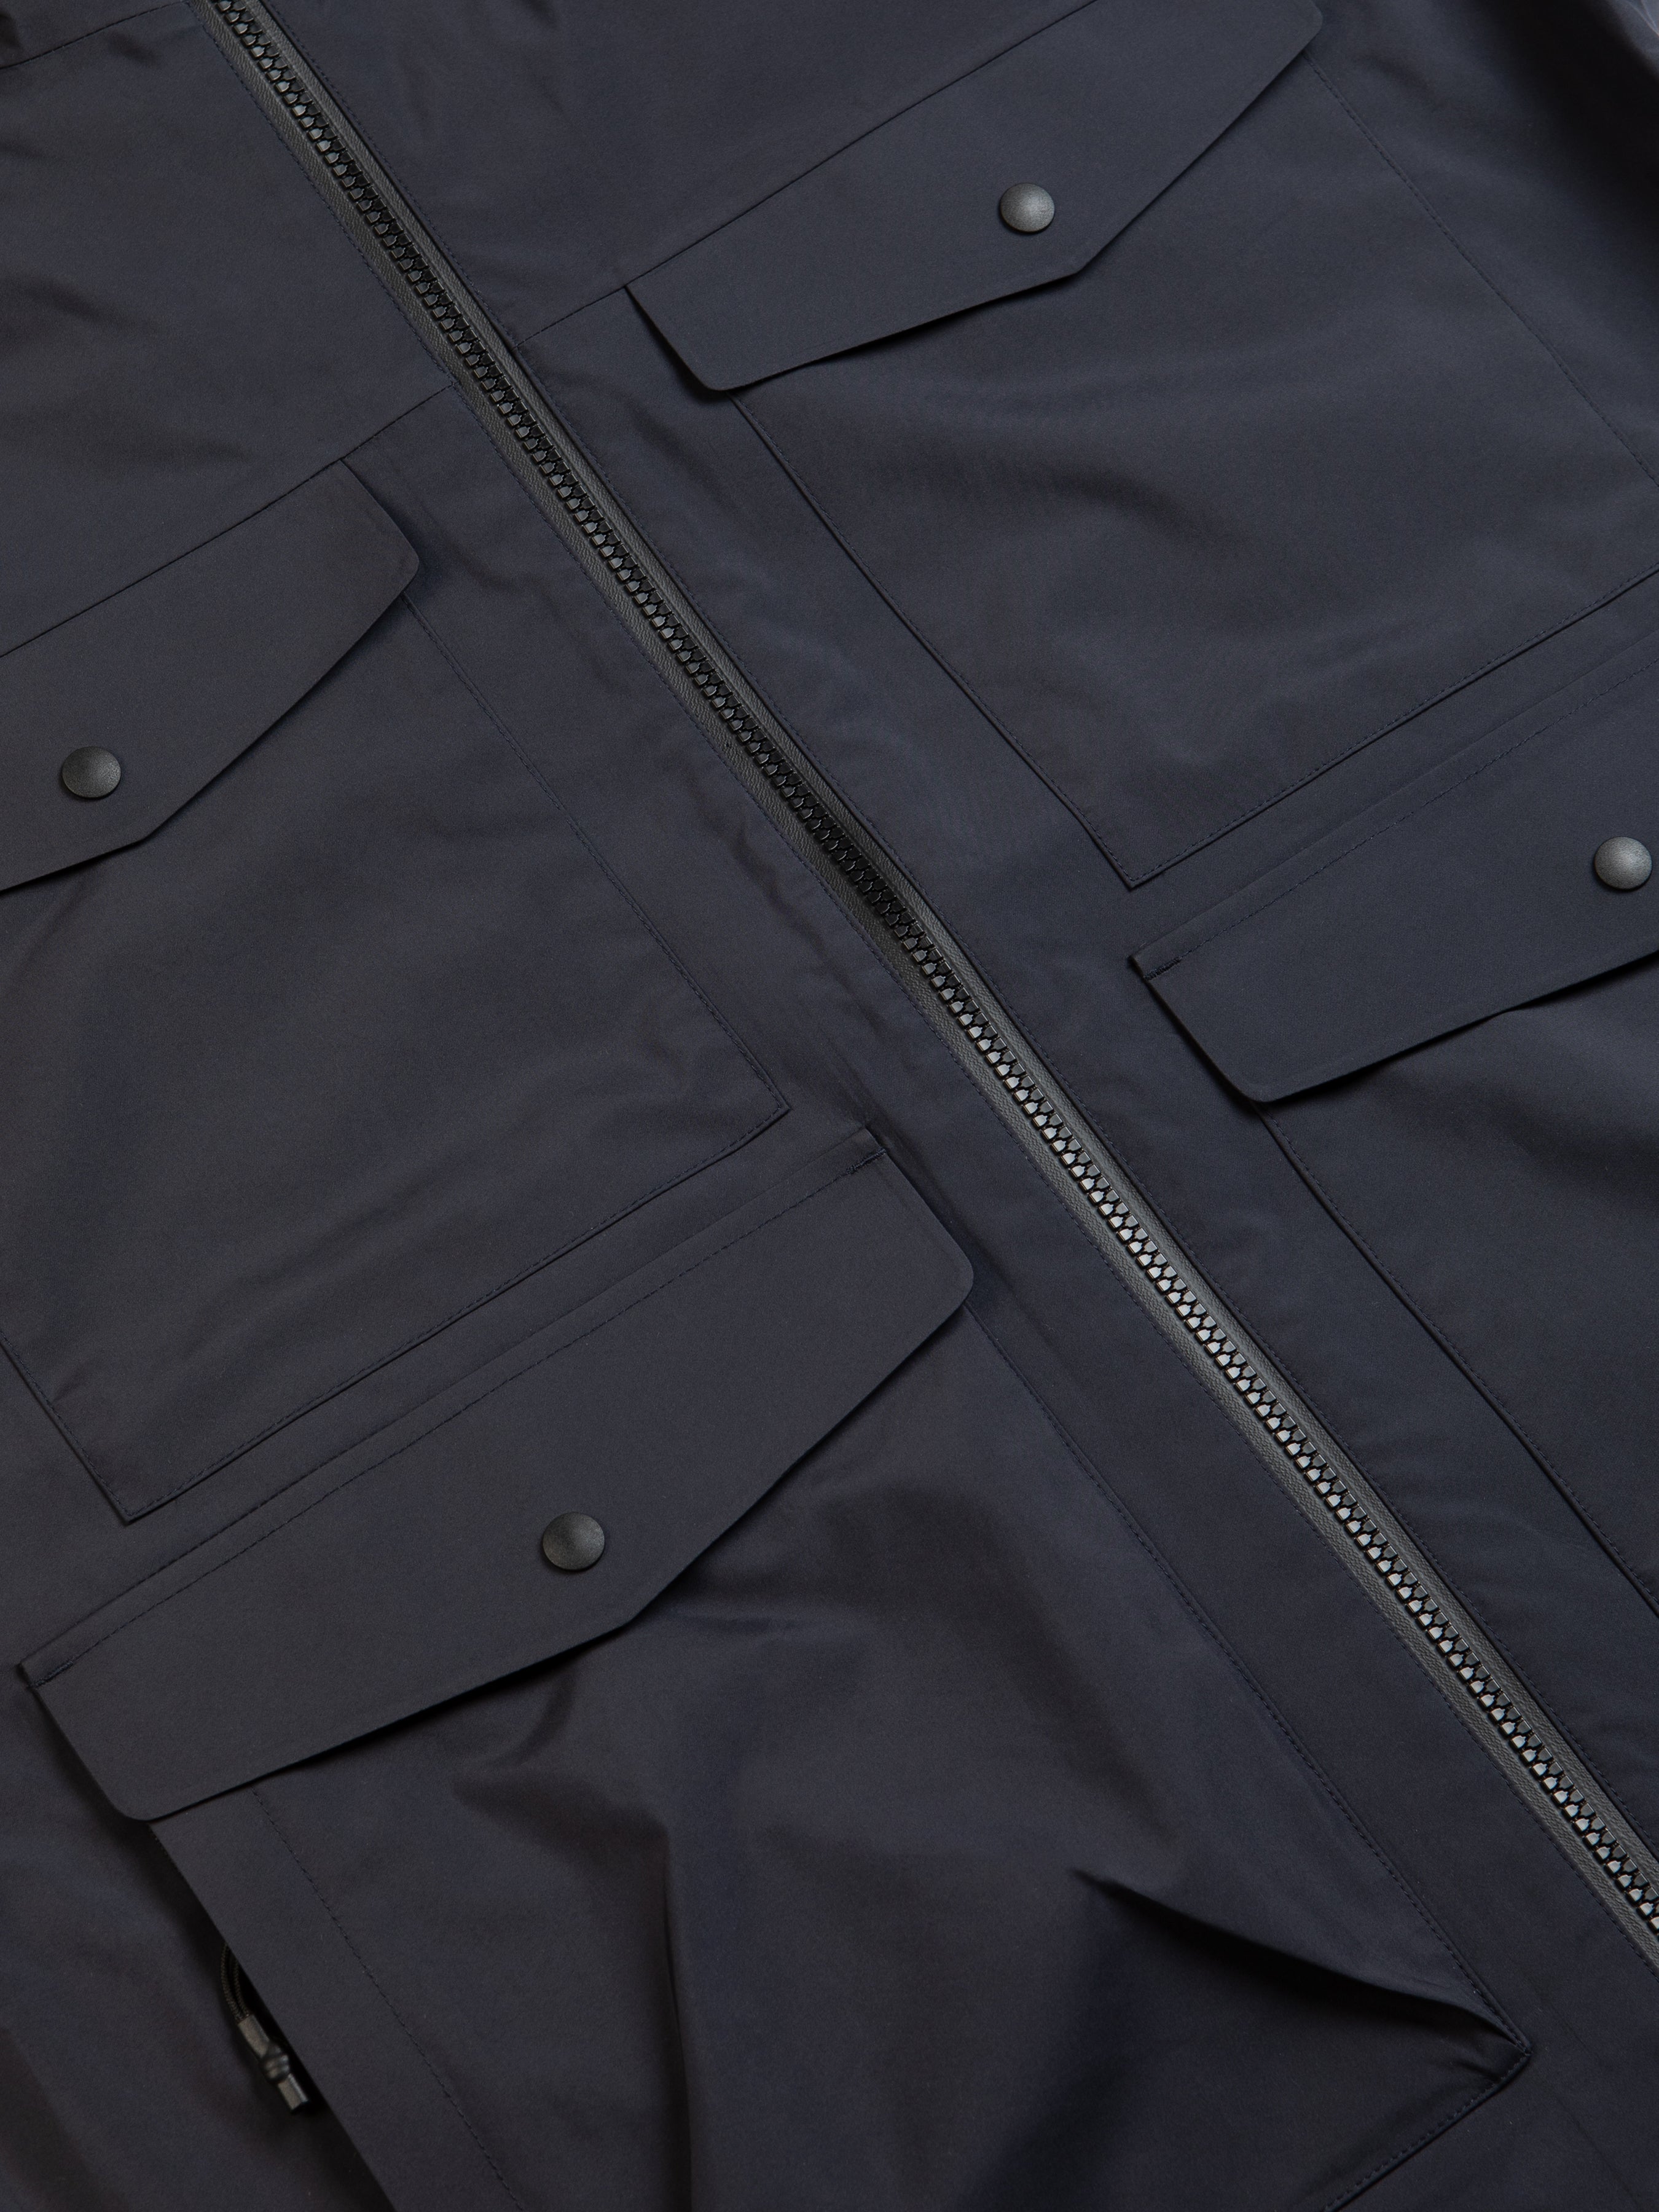 A navy blue waterproof jacket with four patch pockets to the front.